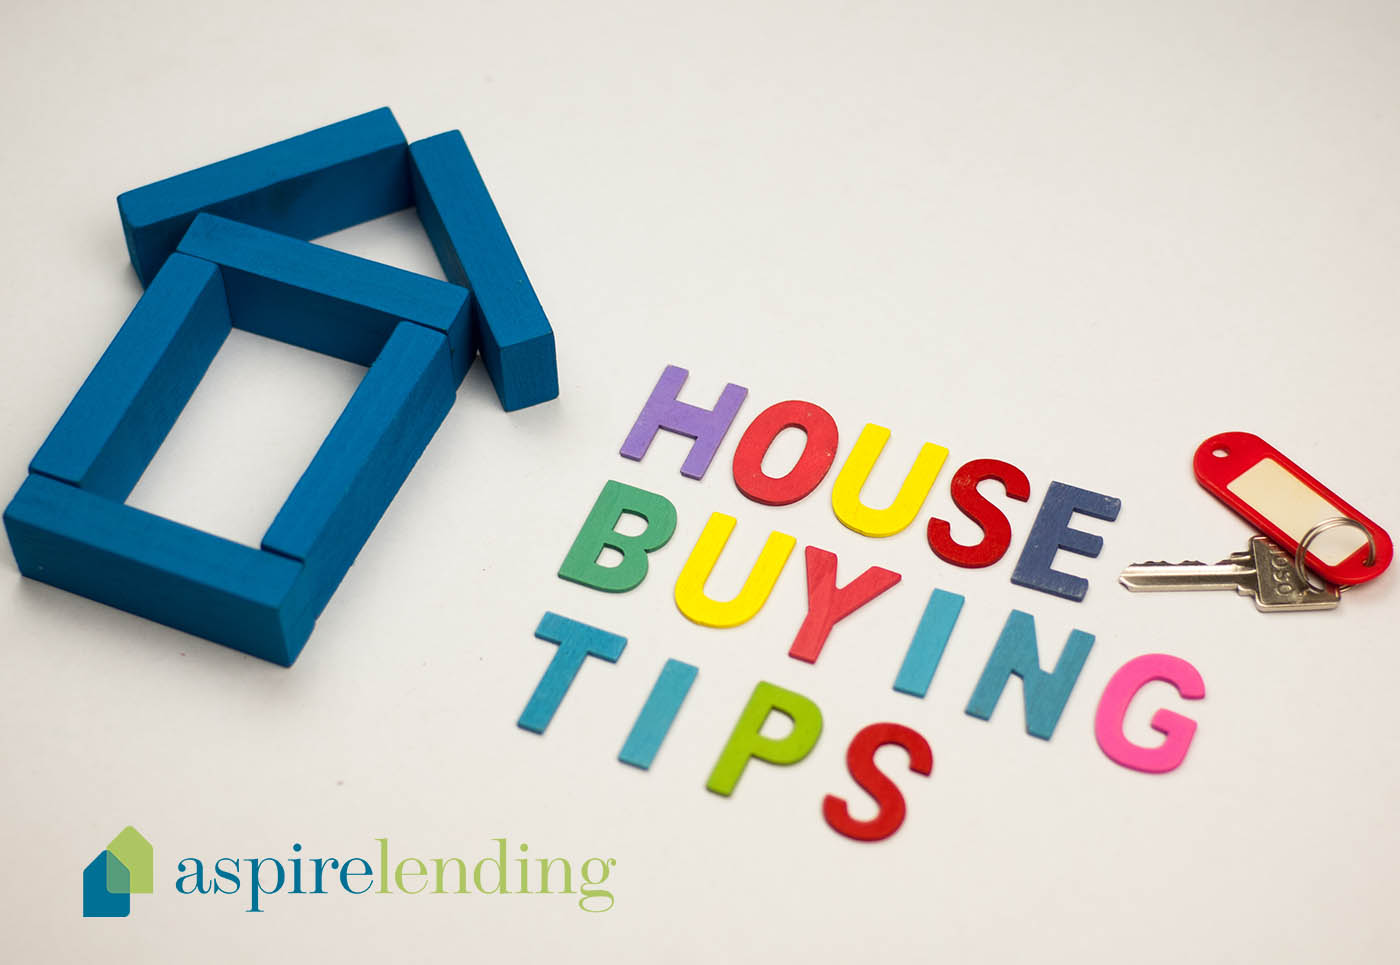 house buying tips